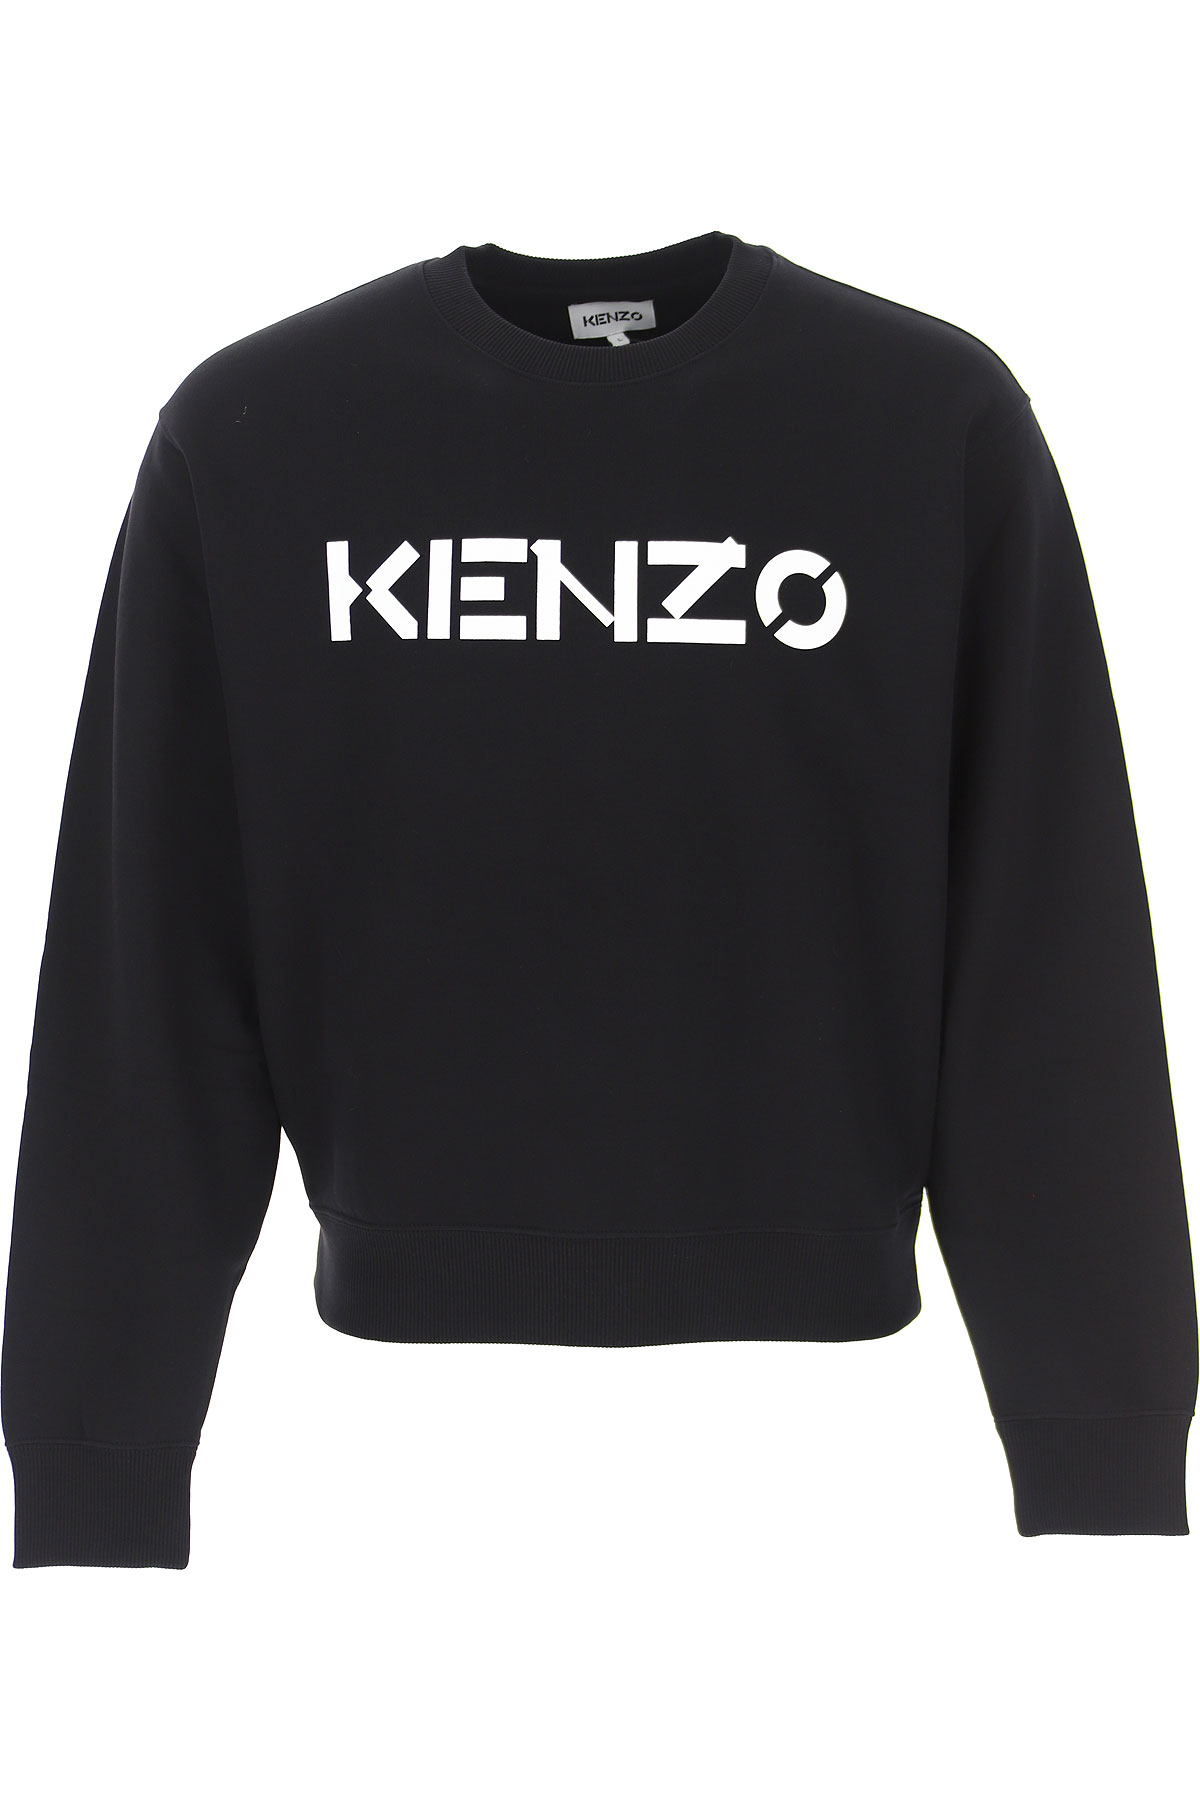 Mens Clothing Kenzo, Style code: 5sw000-4md-99